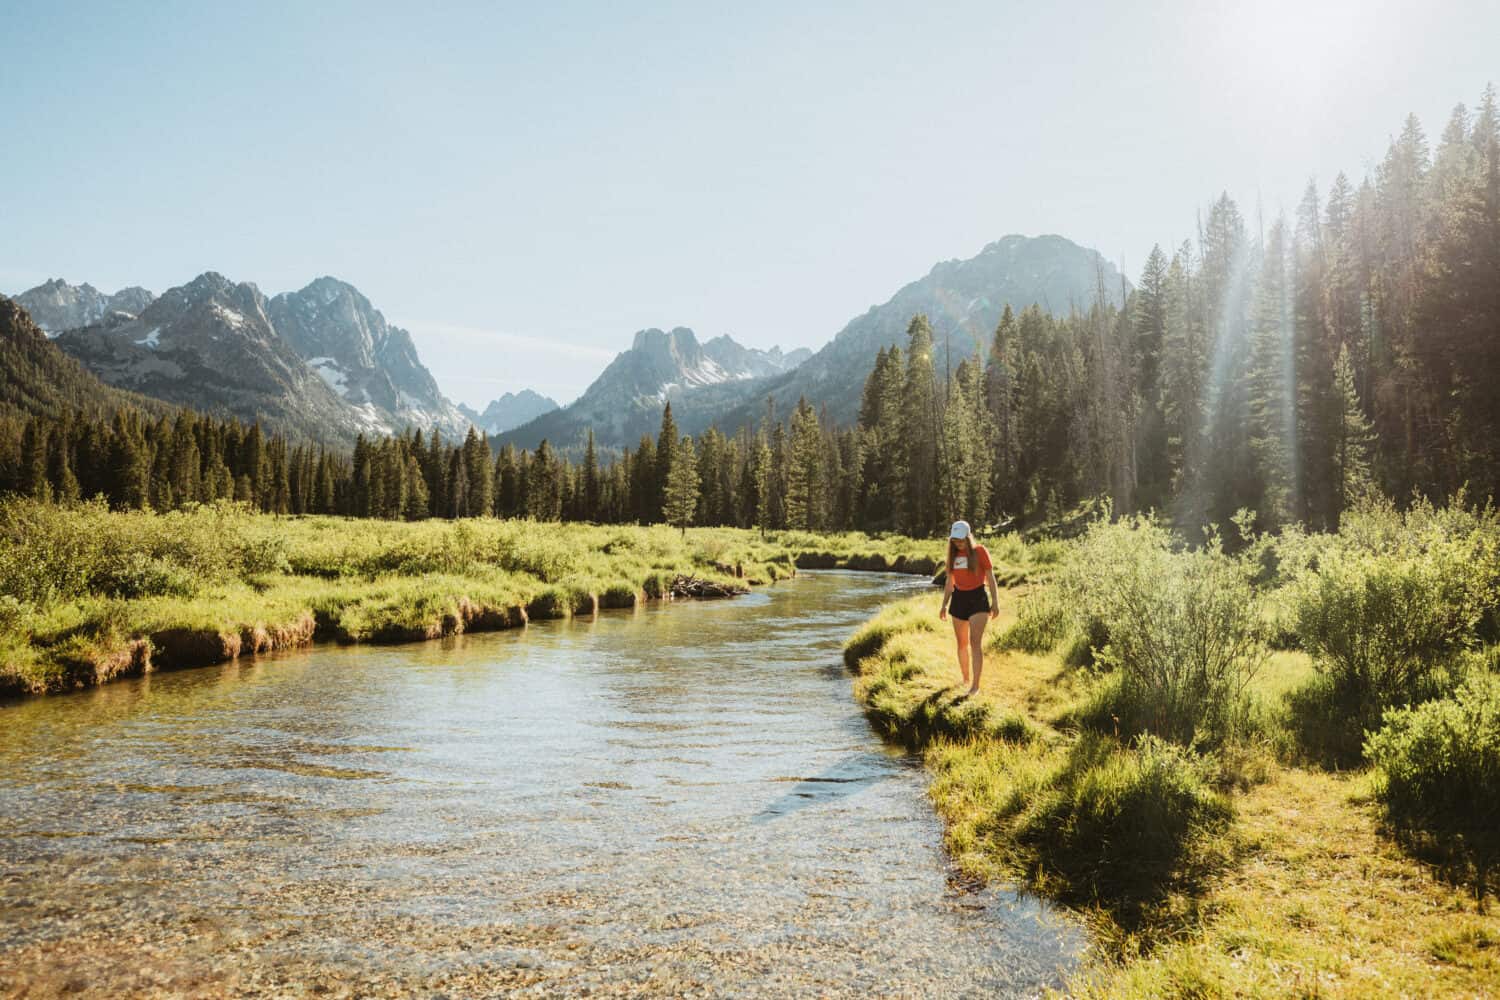 Best Places To See In Idaho - Sawtooth Mountains